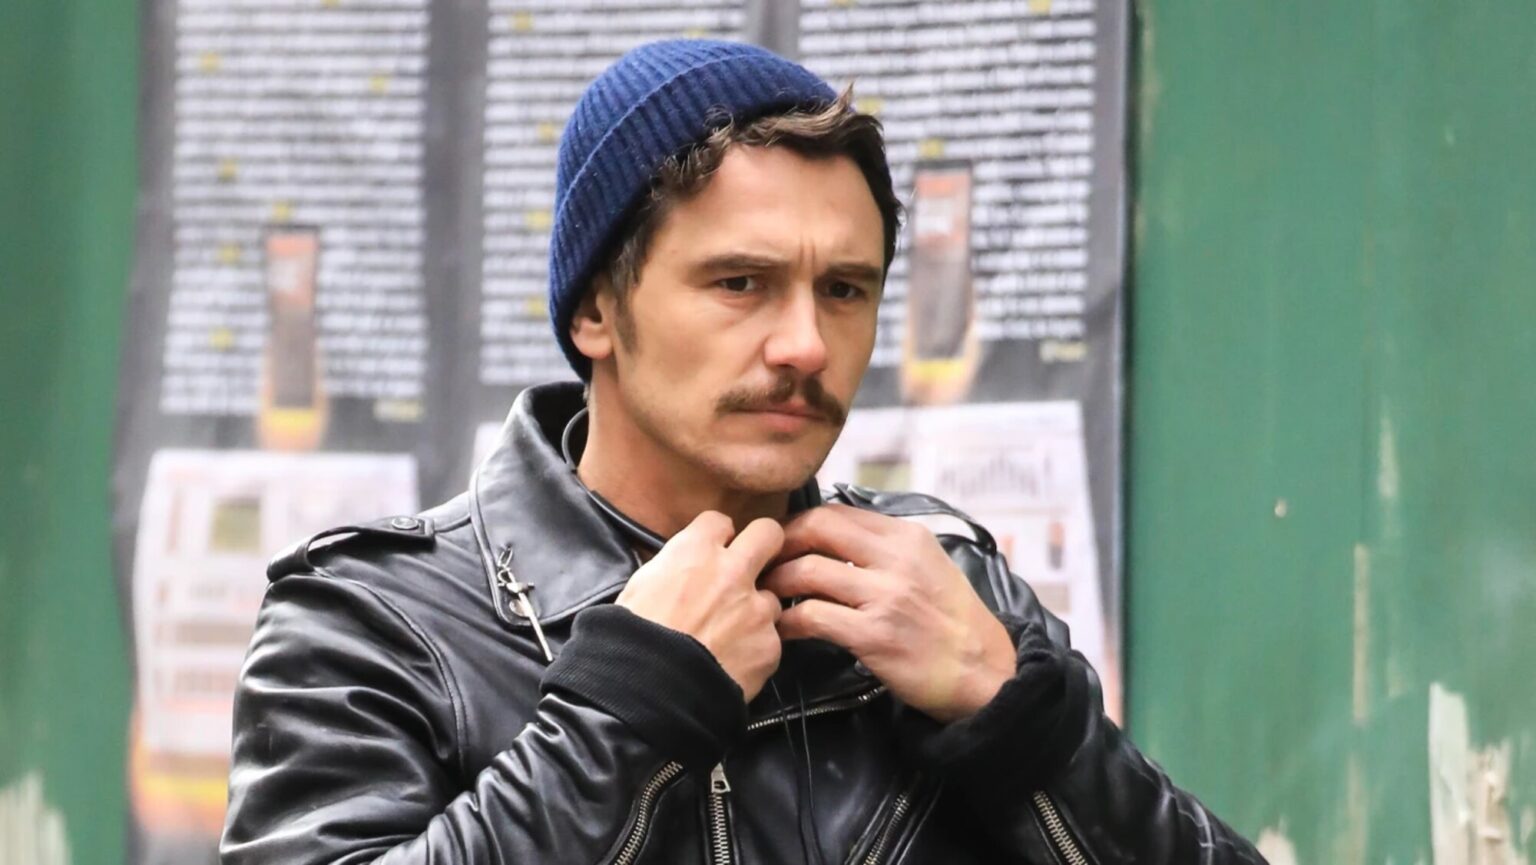 Many women have stepped forward with disturbing allegations made against James Franco, so how is this affecting his net worth? Read all about his case here.